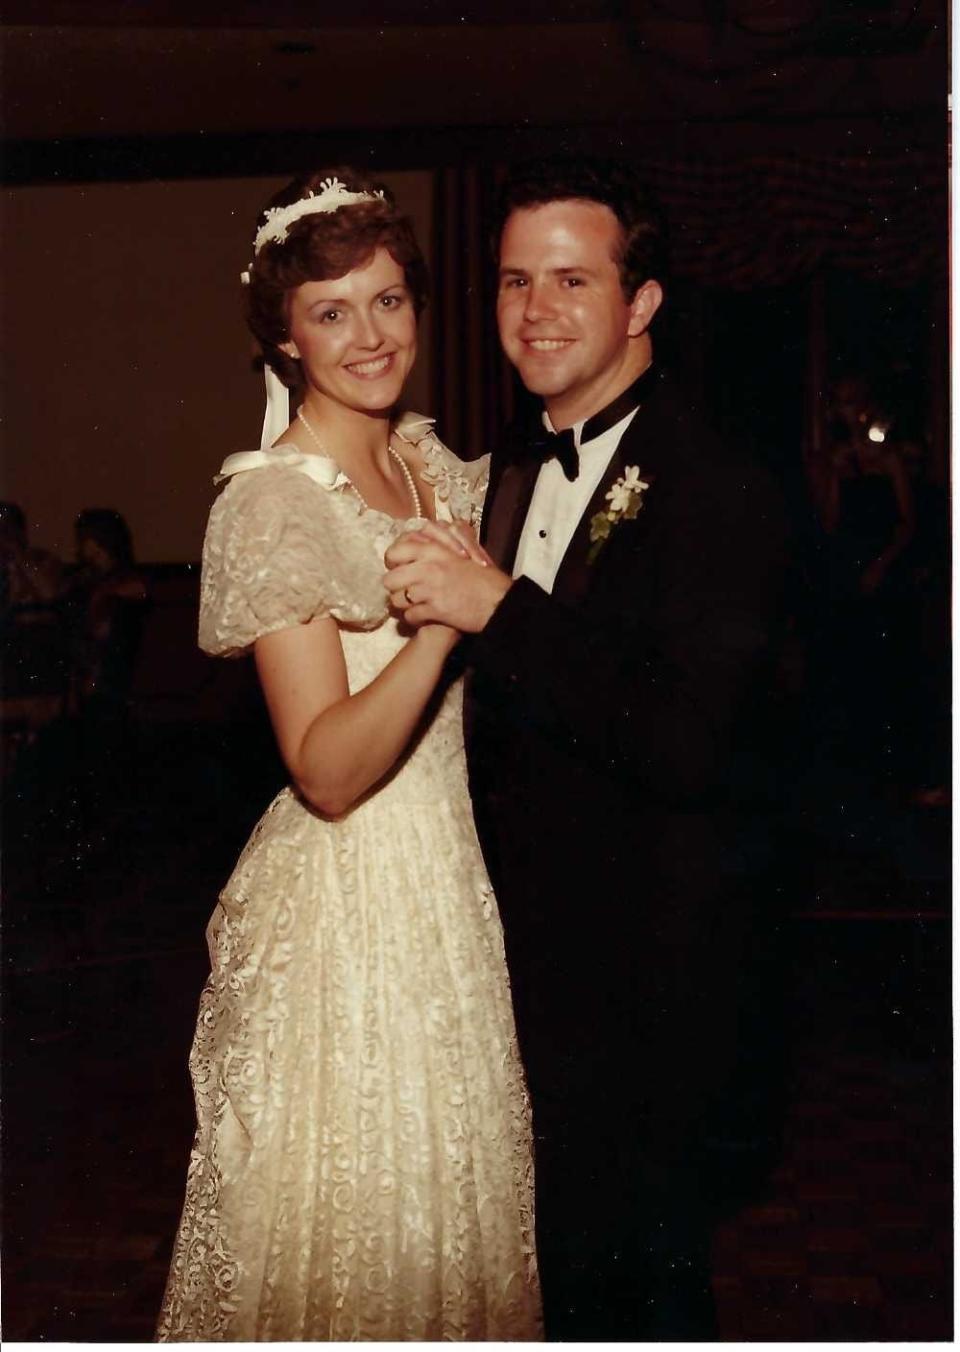 Tim and Melinda O'Brien dance at their wedding in 1983.